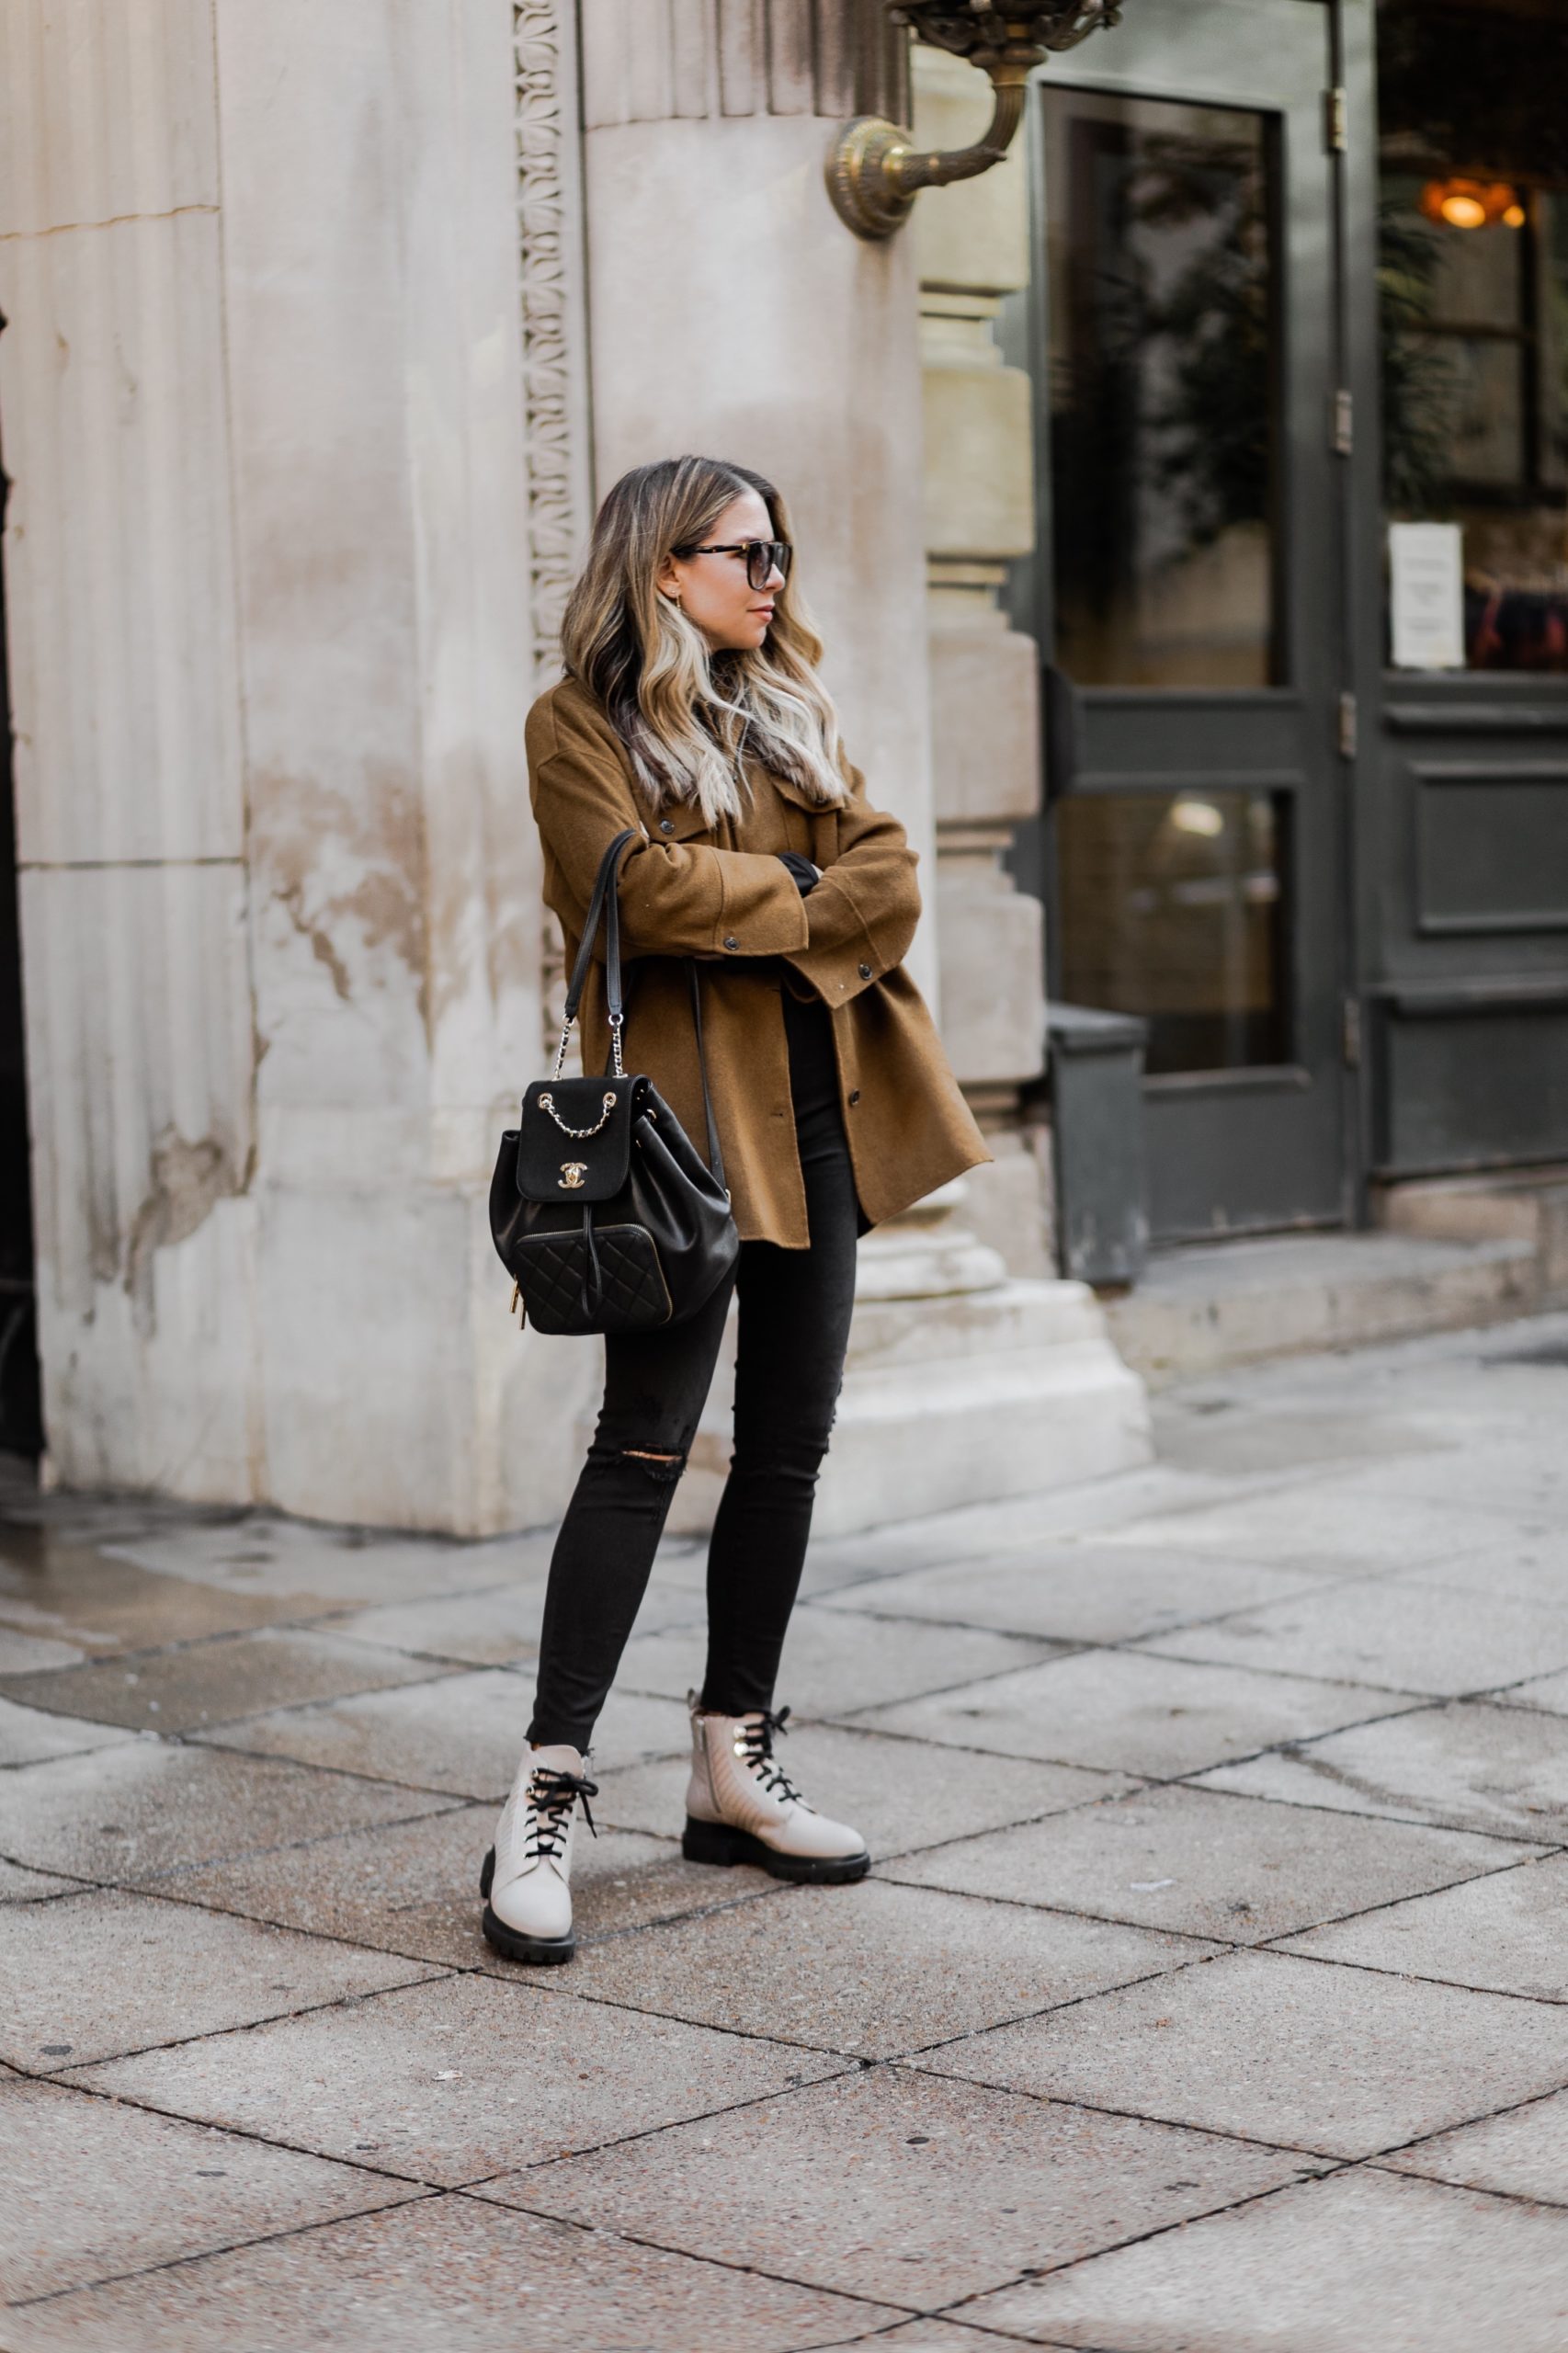 The Fashion Guide Blog : Street style trend: leather leggings.